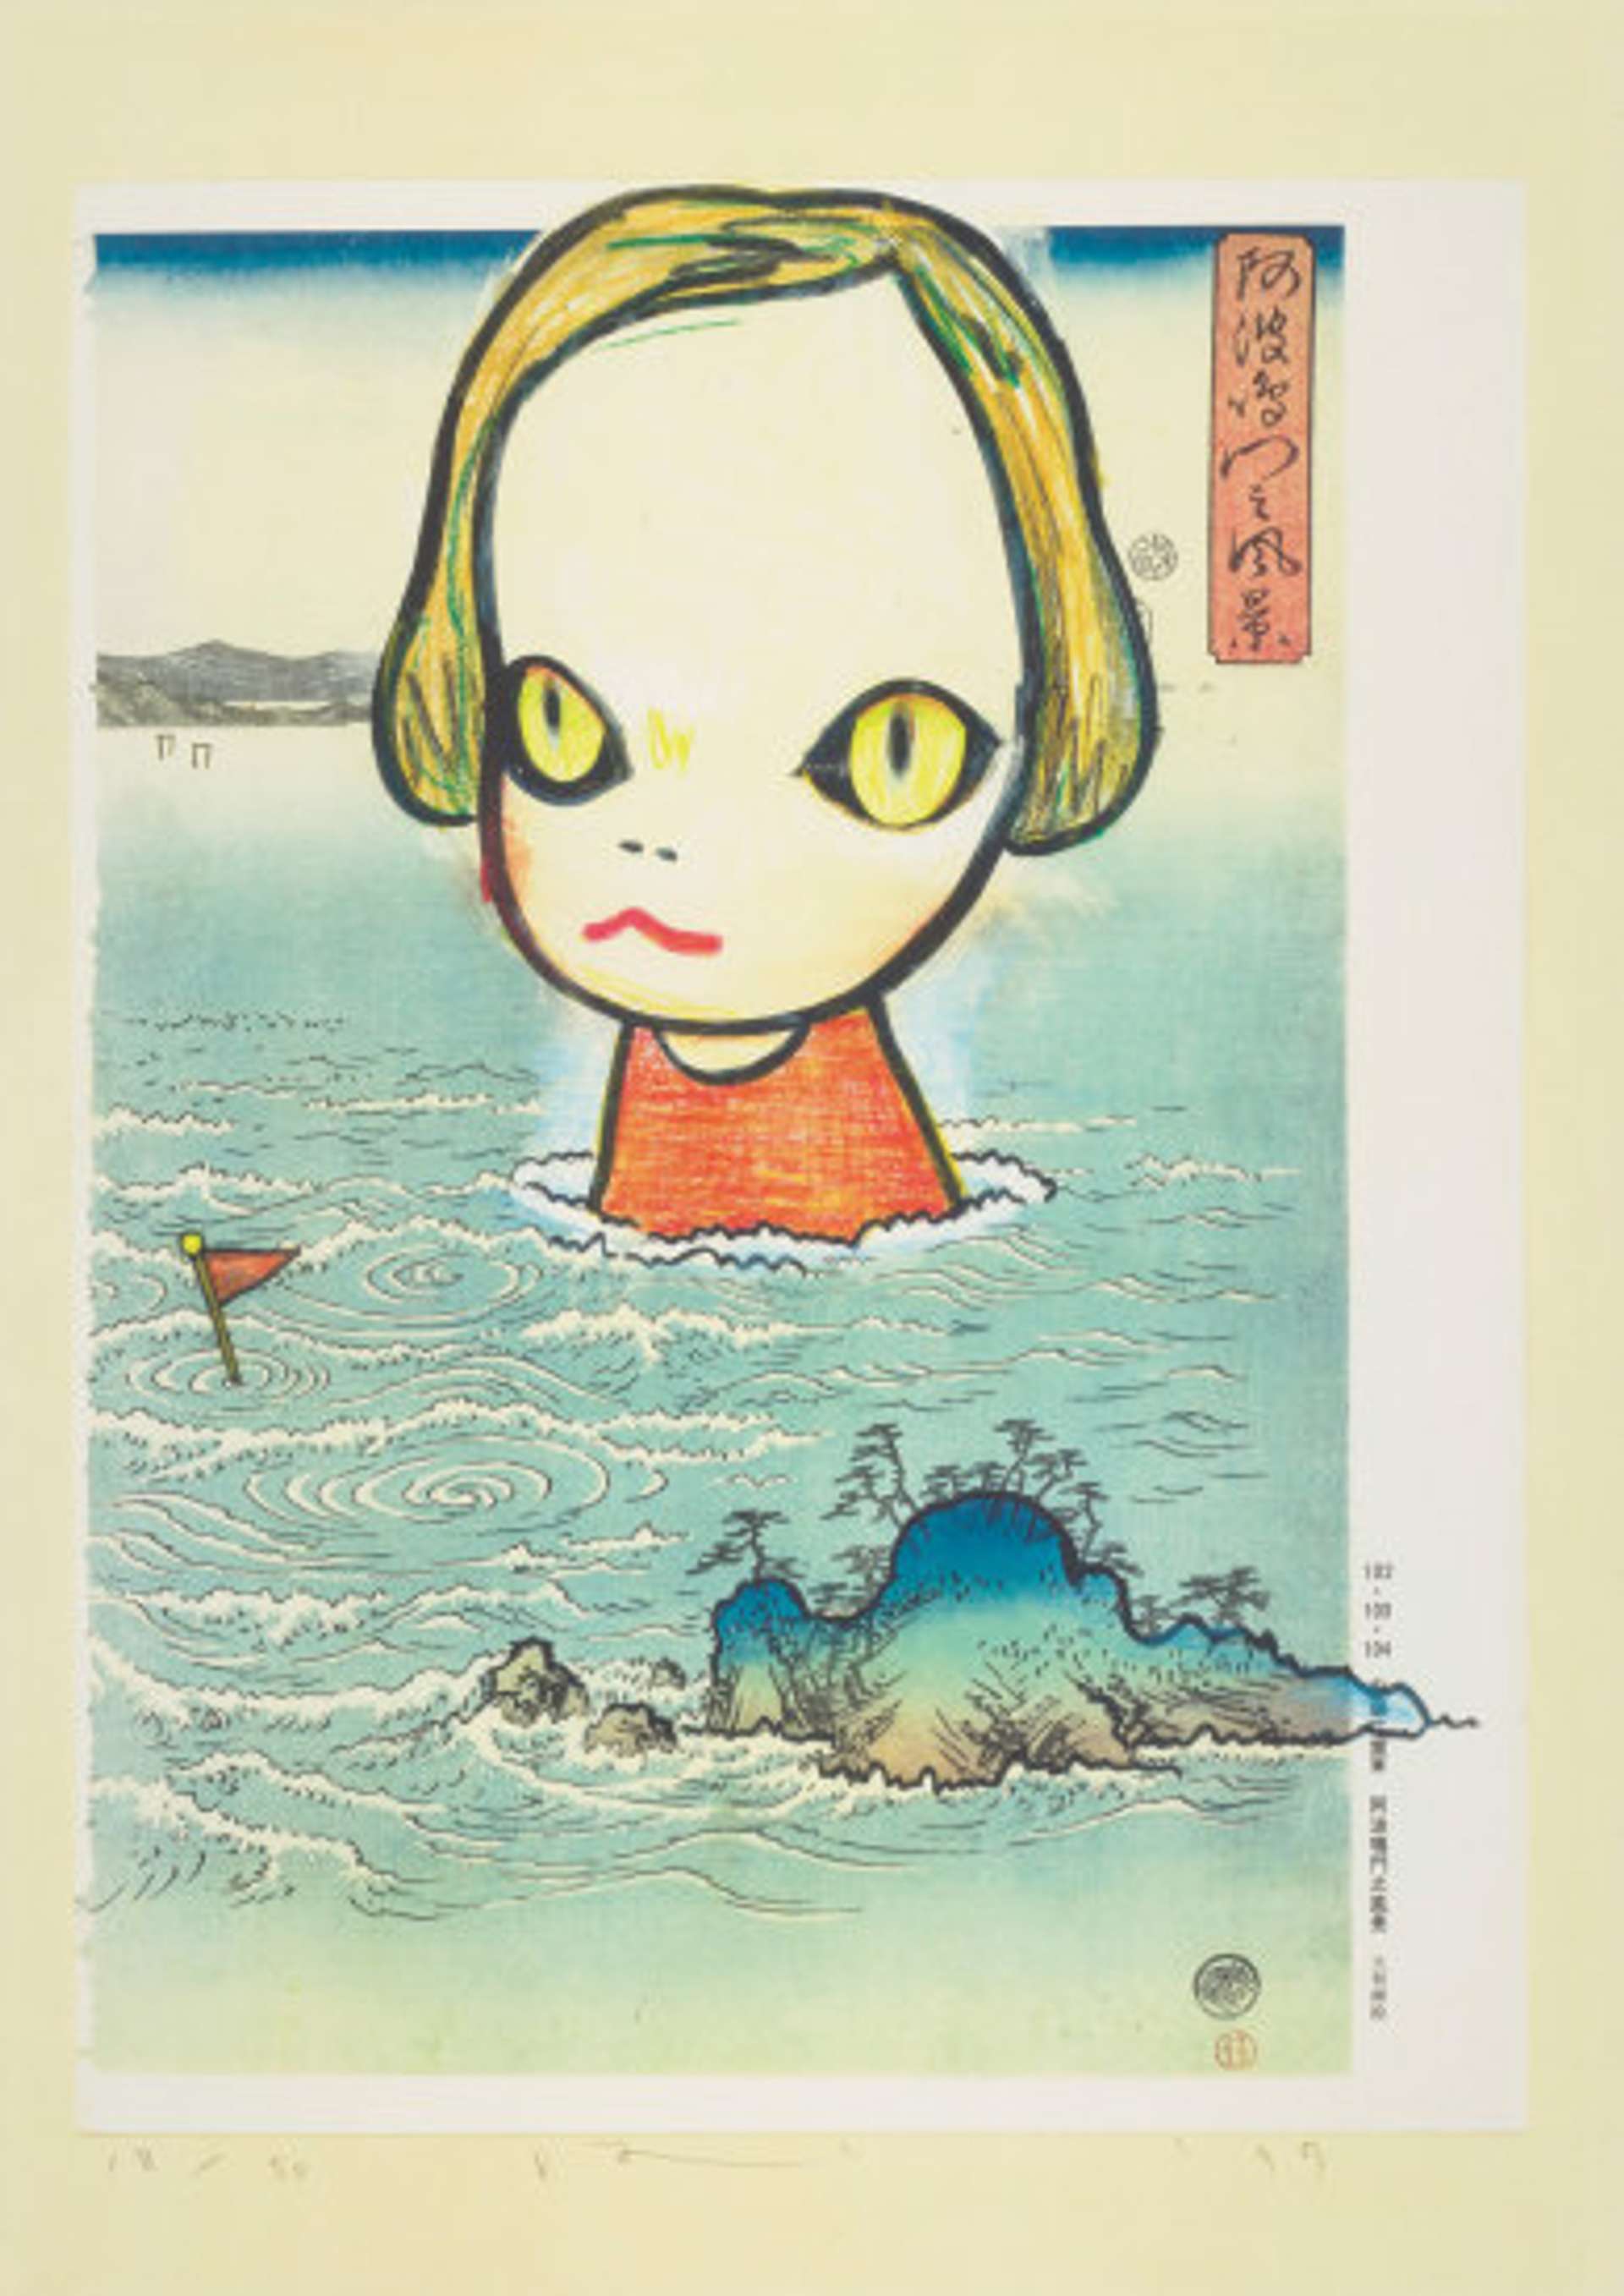 Yoshitomo Nara’s Ocean Child. The image shows a cartoonish girl surrounded by woodblock-inspired waves.